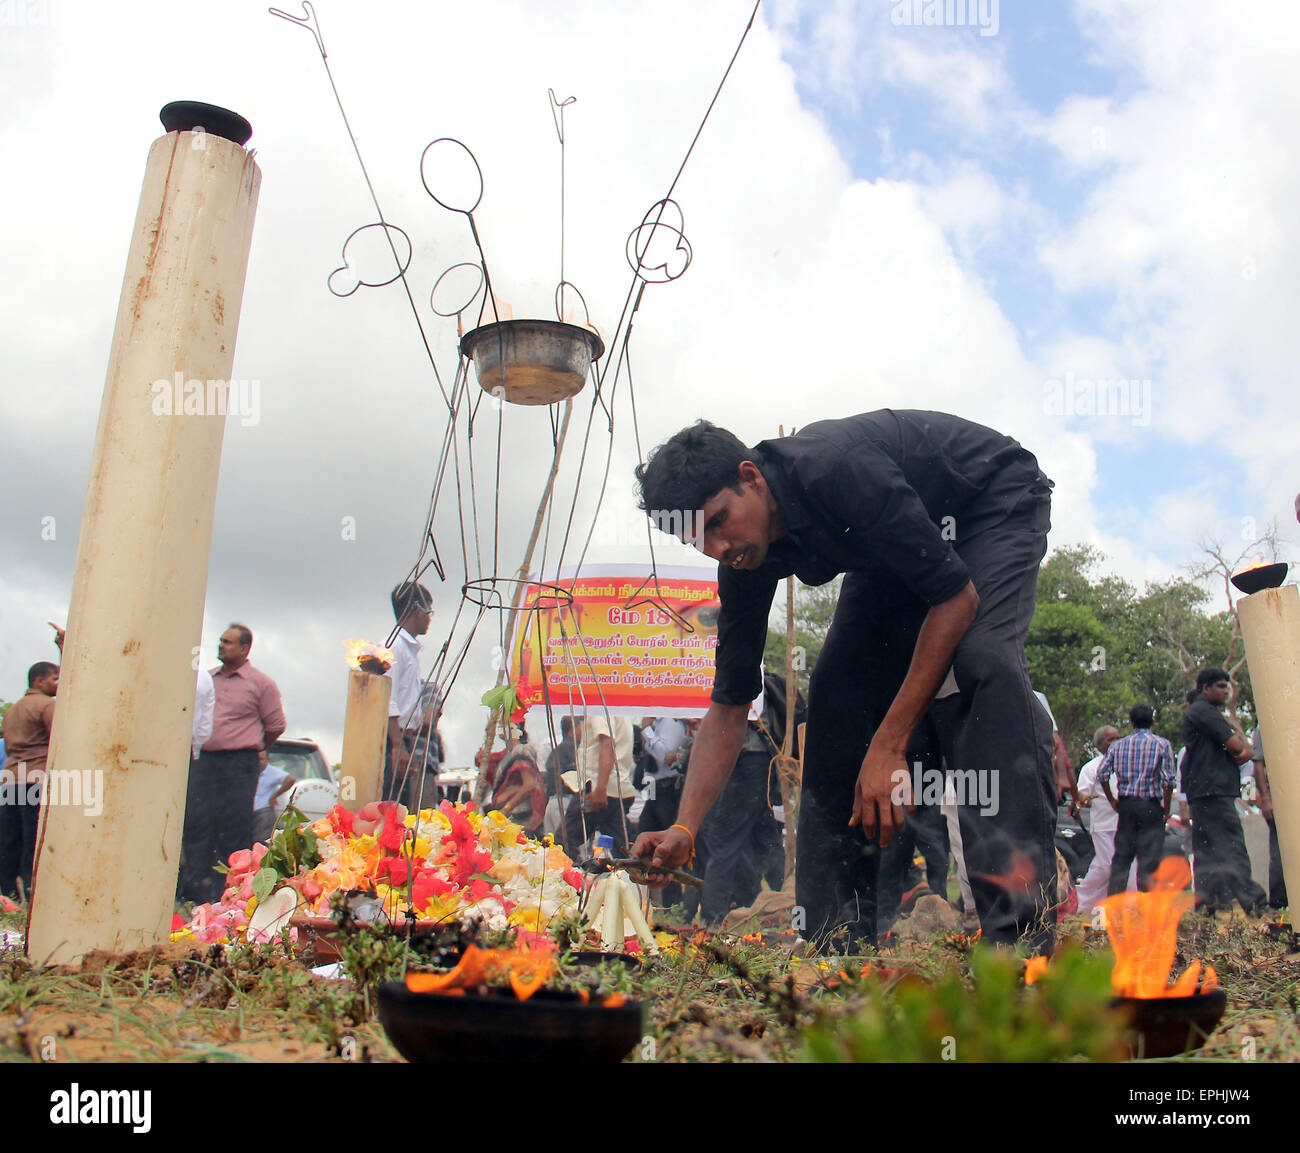 Jaffna, Sri Lanka. 18th May, 2015. People light oil lamps to mourn martyrs in Jaffna, Sri Lanka, May 18, 2015. Sri Lankan Tamils took part in a ceremony at Mullaivaukkal on the outskirts of Jaffna on Monday, in commemoration of those who died six years ago in battles between Liberation Tigers of Tamil Eelam (LTTE) fighters and government troops at the end of the three-decade separatist conflict. © A. Rajhita/Xinhua/Alamy Live News Stock Photo